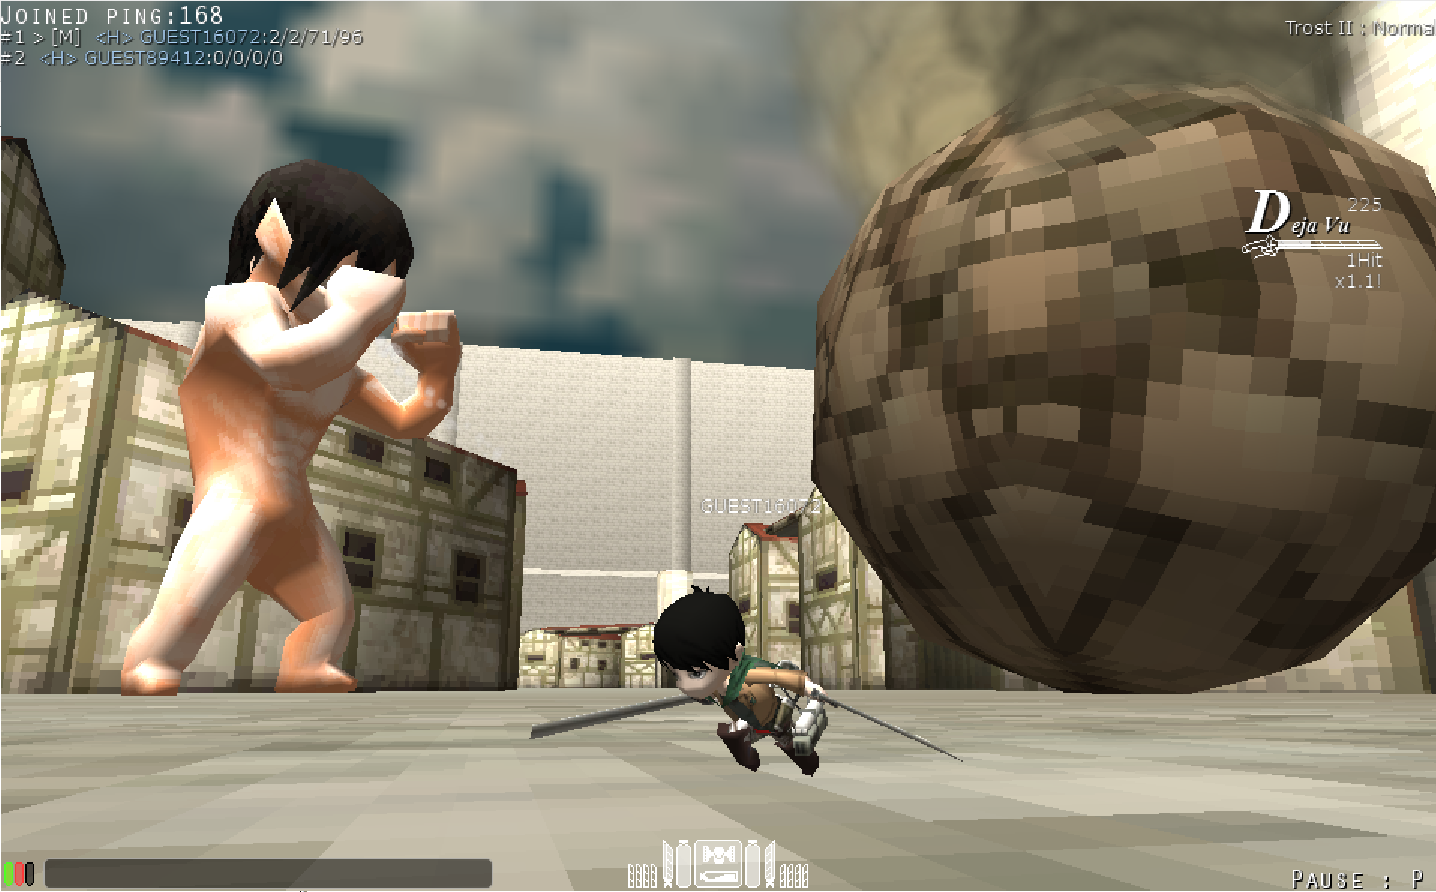 attack on titan tribute game fenglee